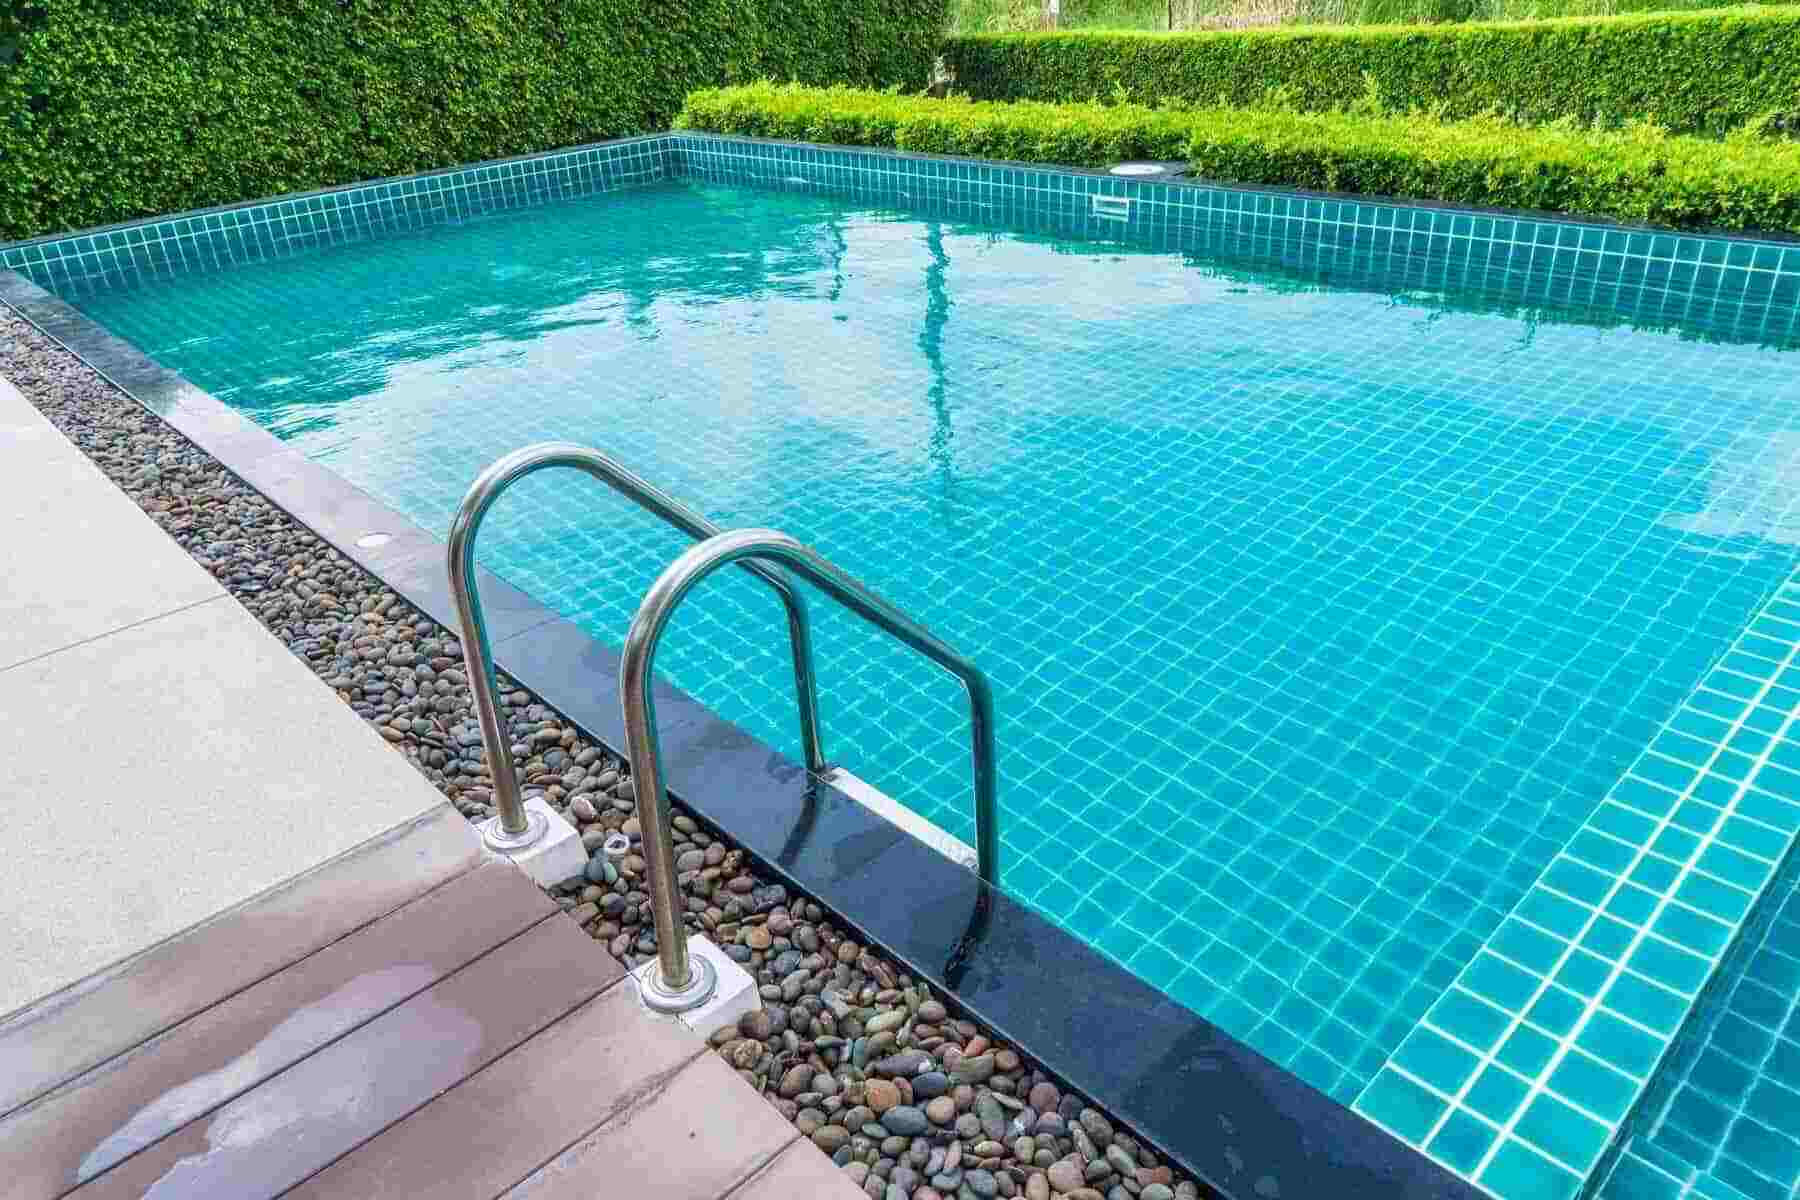 Pool Insulation Guide: How to Waterproof Swimming Pool?